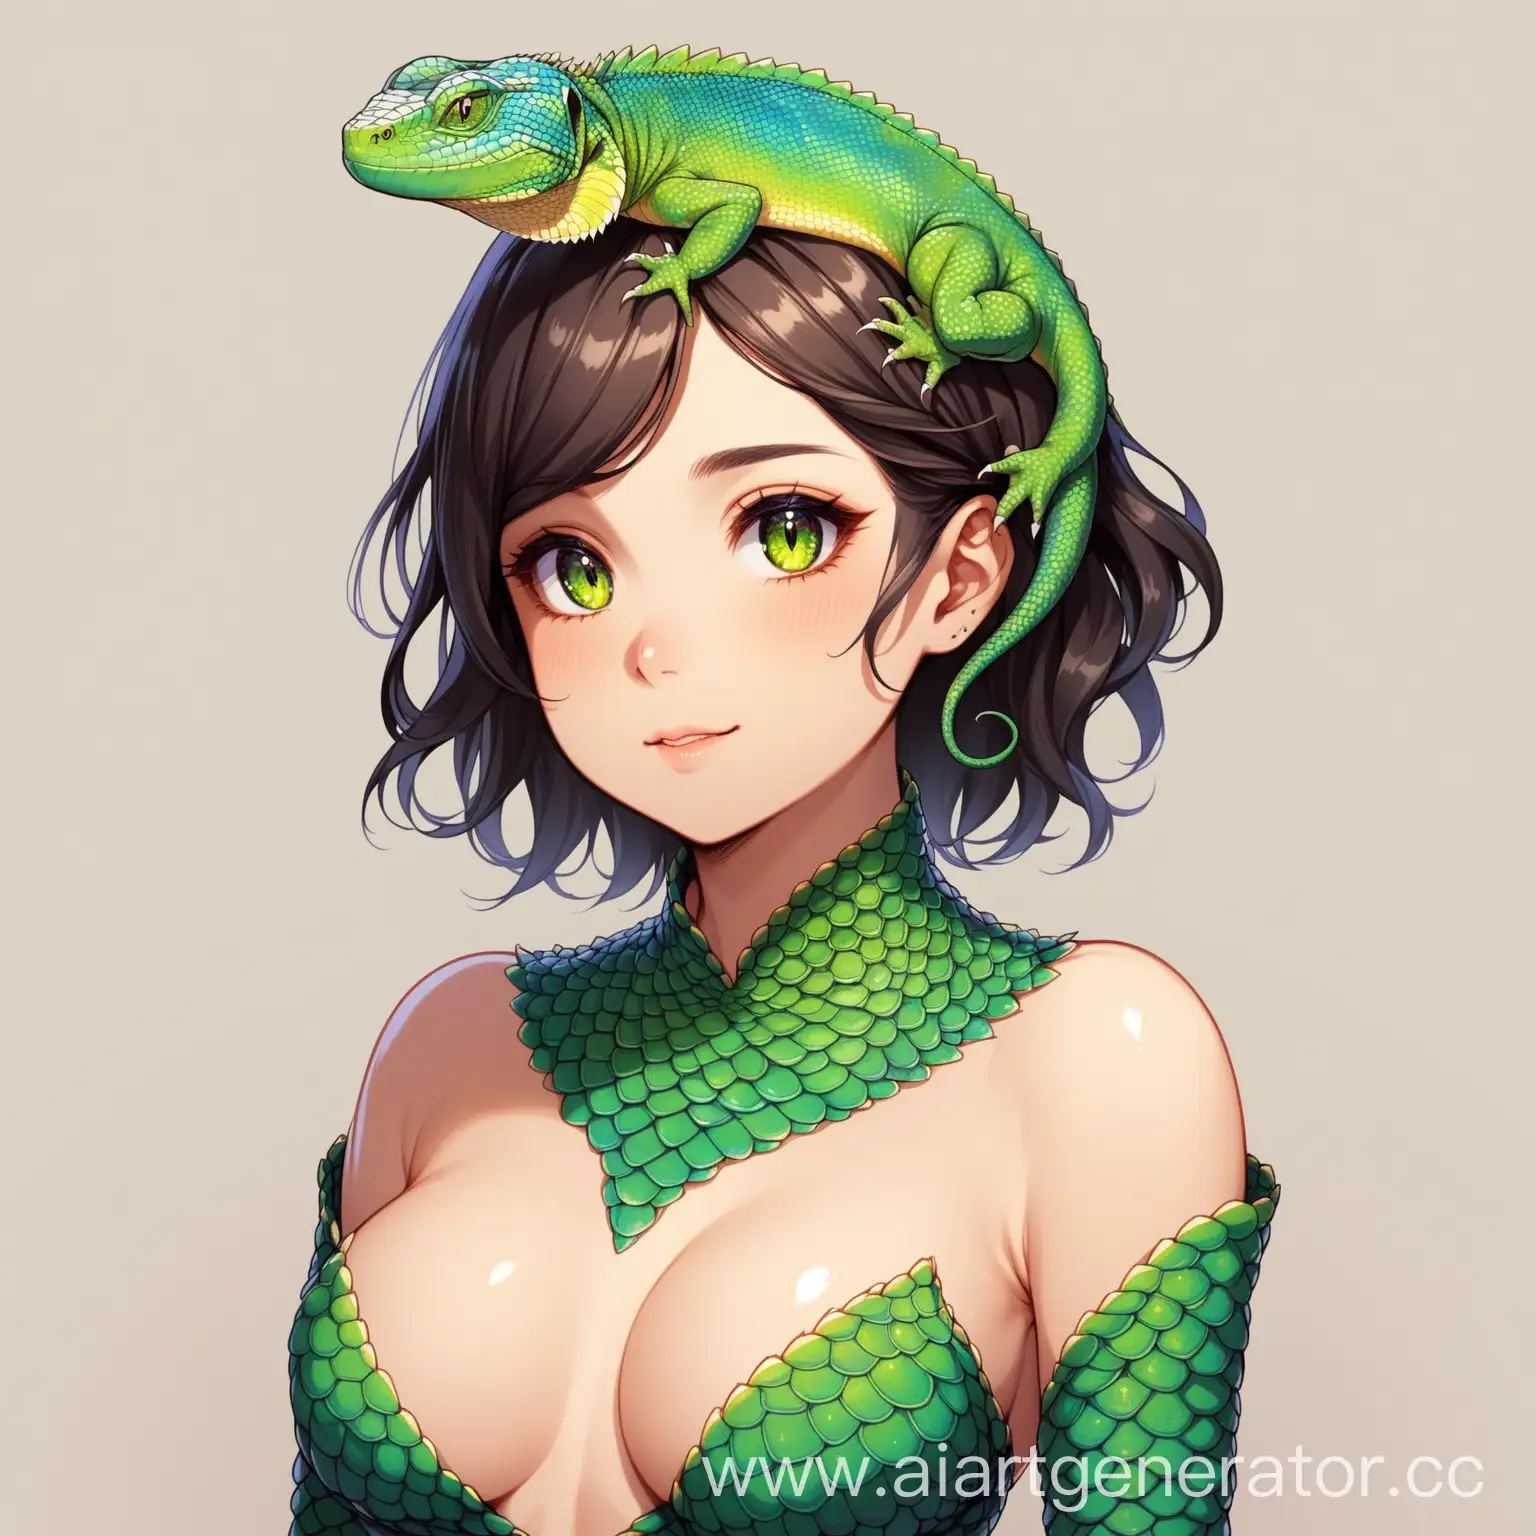 Woman-with-Lizard-Features-HalfLizard-Transformation-and-Unique-Eyes